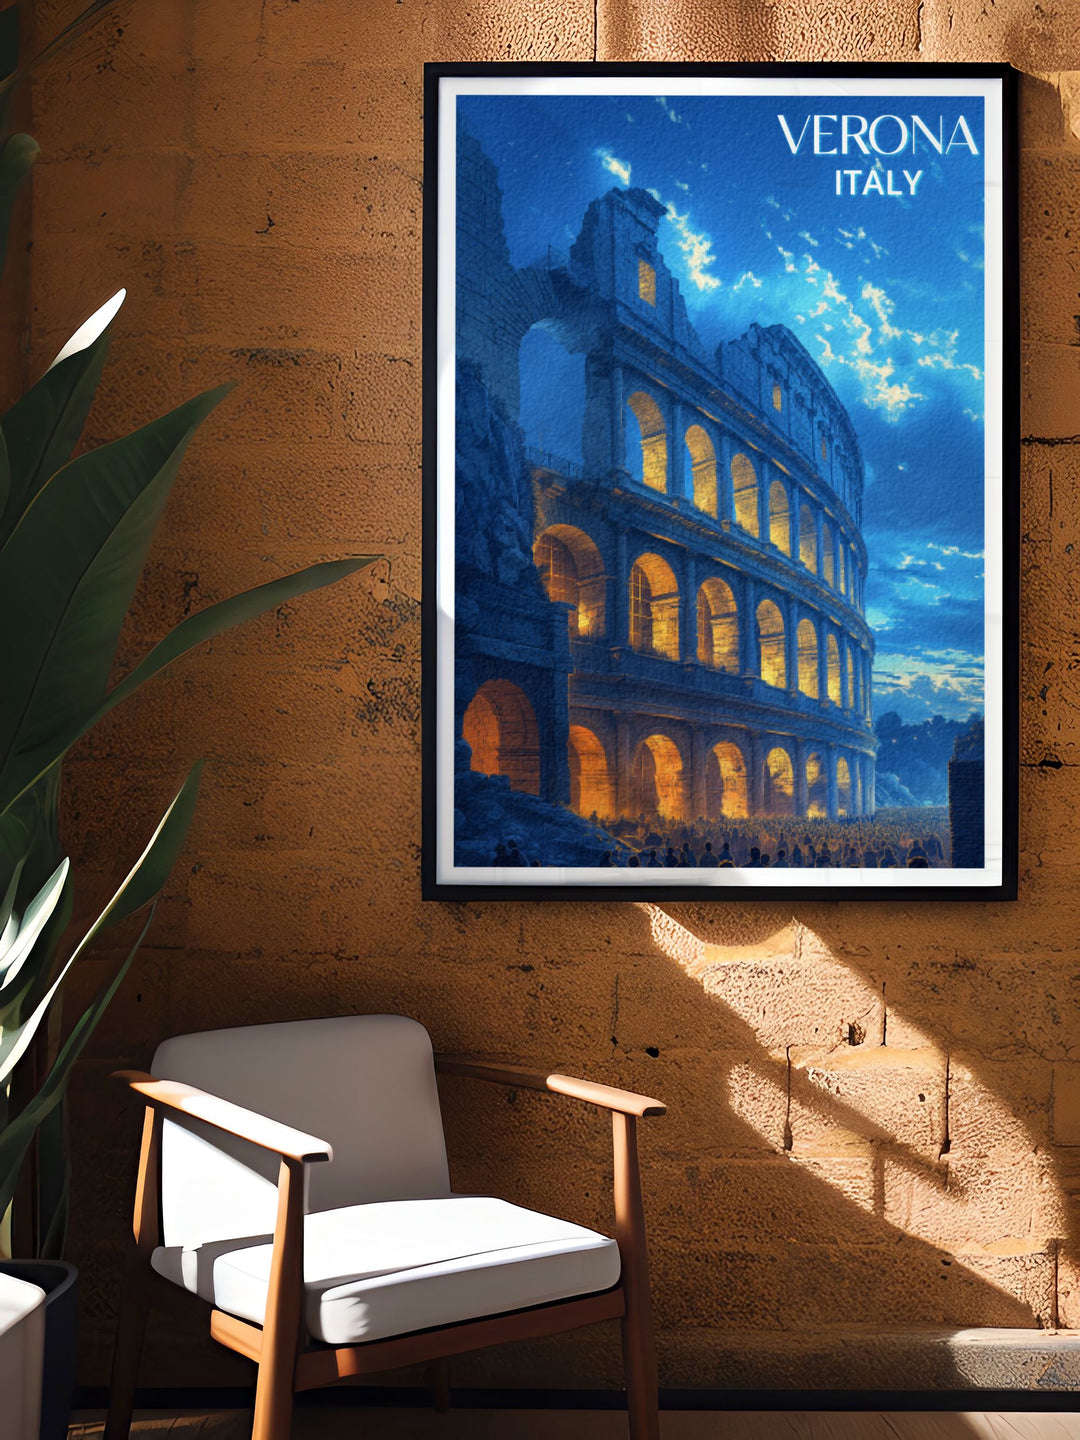 Featuring the Verona Arena, this modern wall decor piece combines contemporary design with historical architecture. Ideal for those looking to celebrate Italys rich cultural history while adding a stylish element to their home.